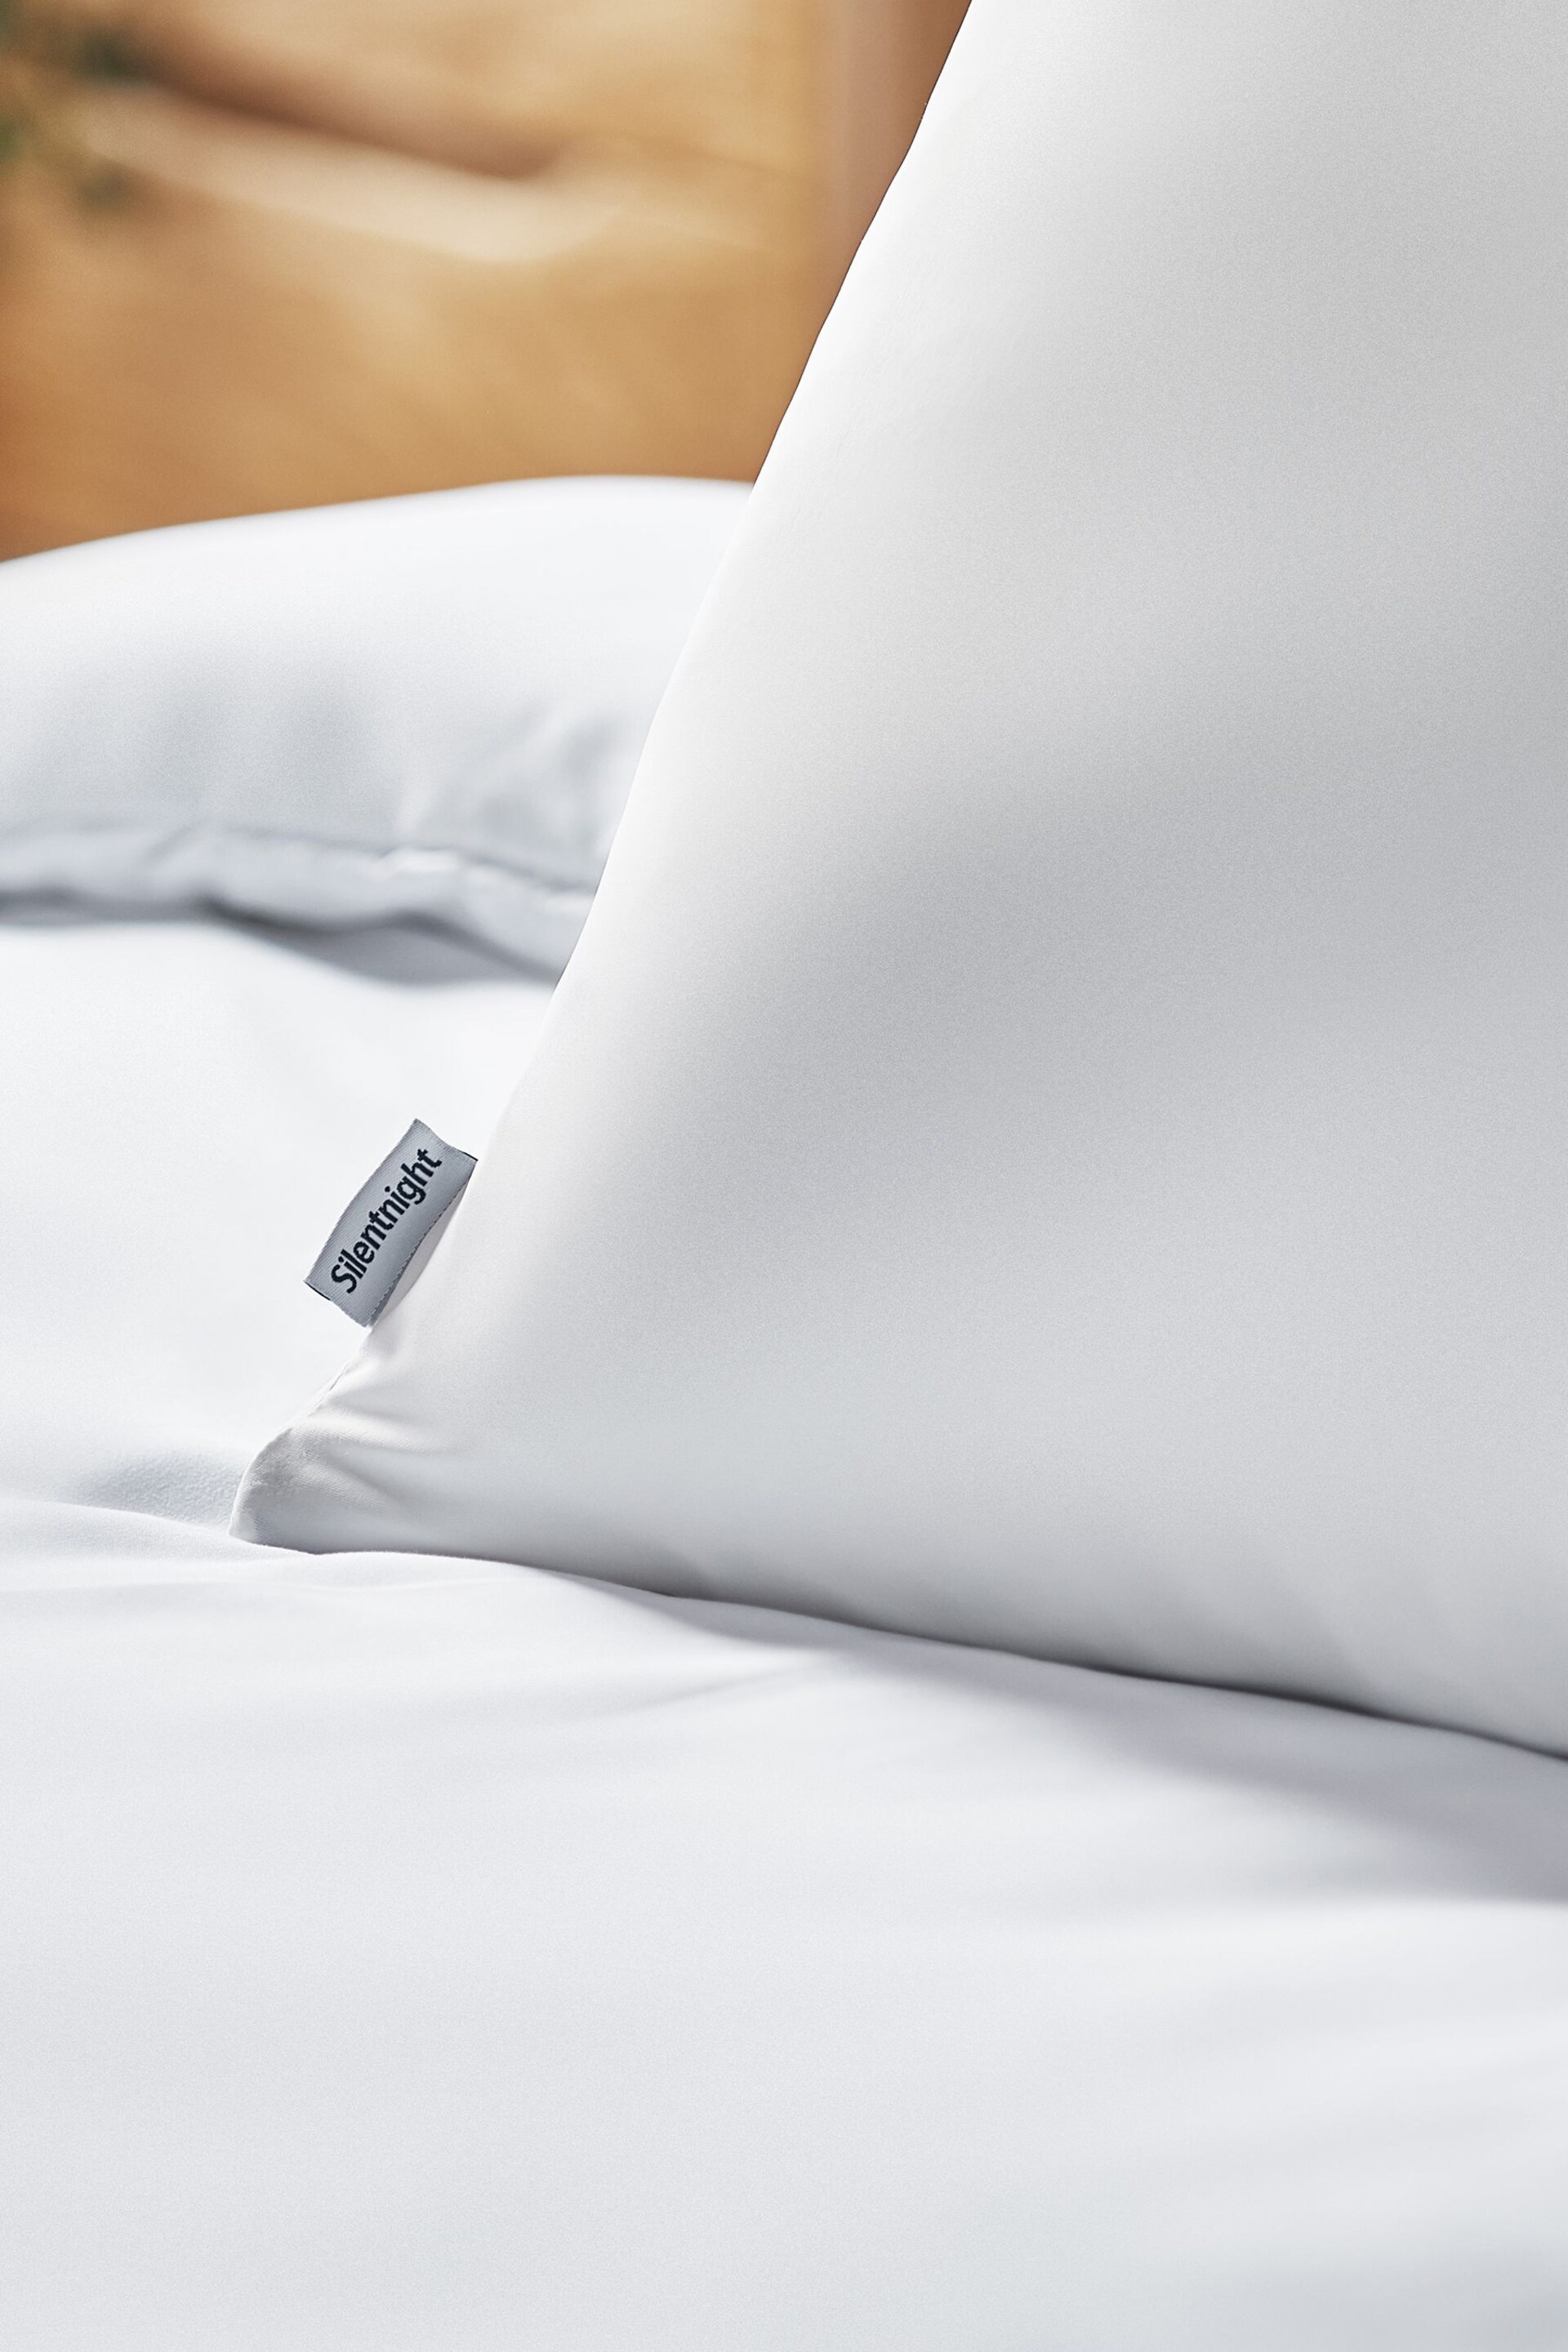 Silentnight White Wellbeing Cool Touch Pillowcase - Image 4 of 4